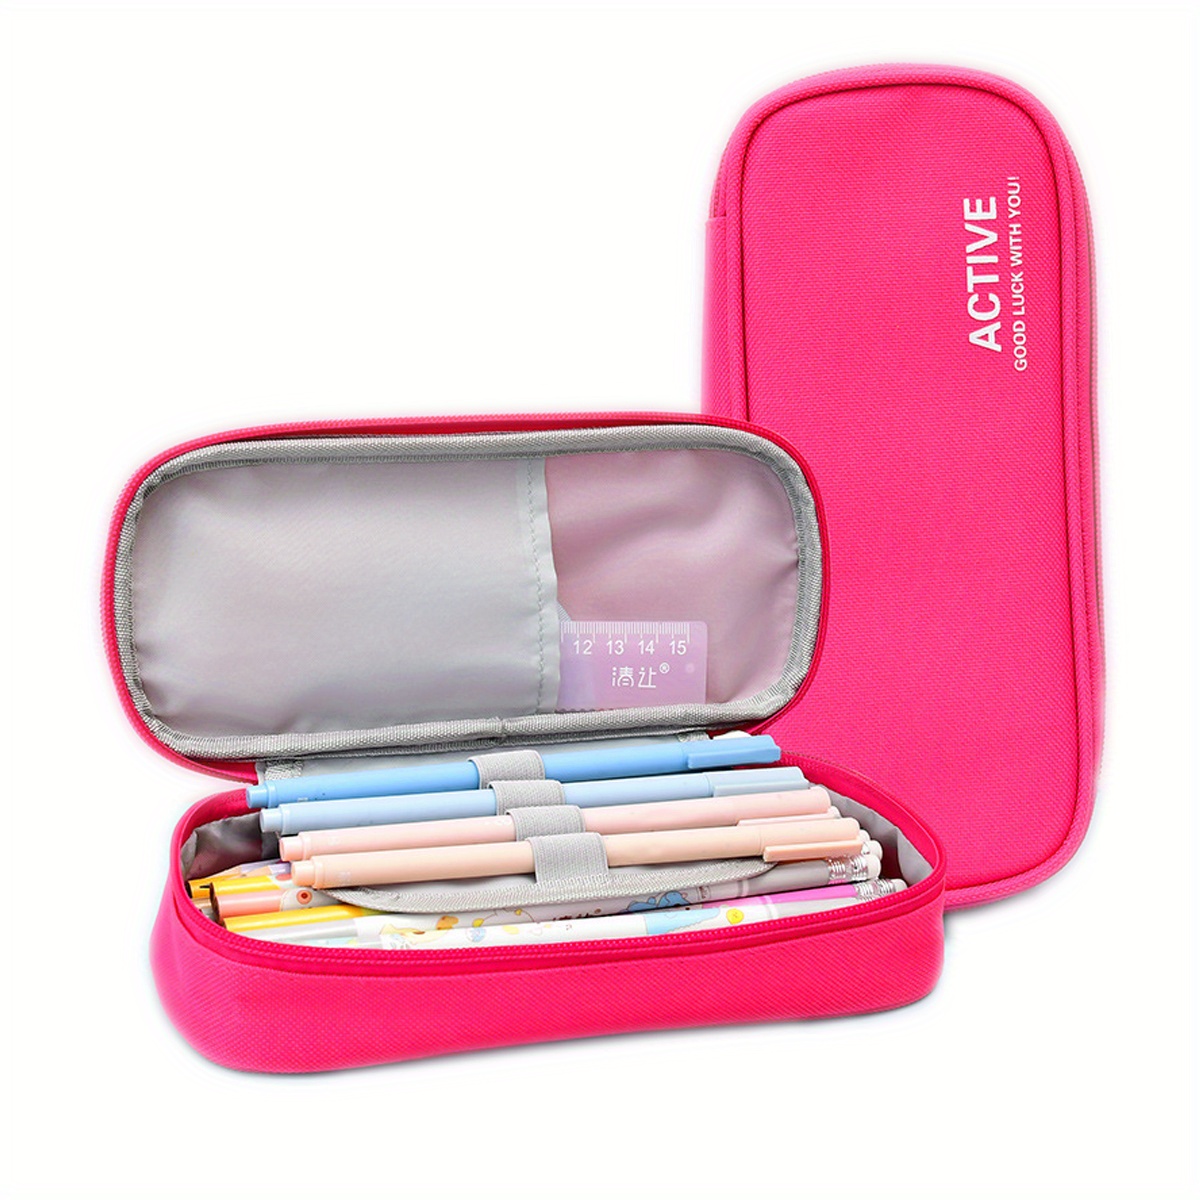 Is That The New 1pc Expandable Pencil Case With Compartments